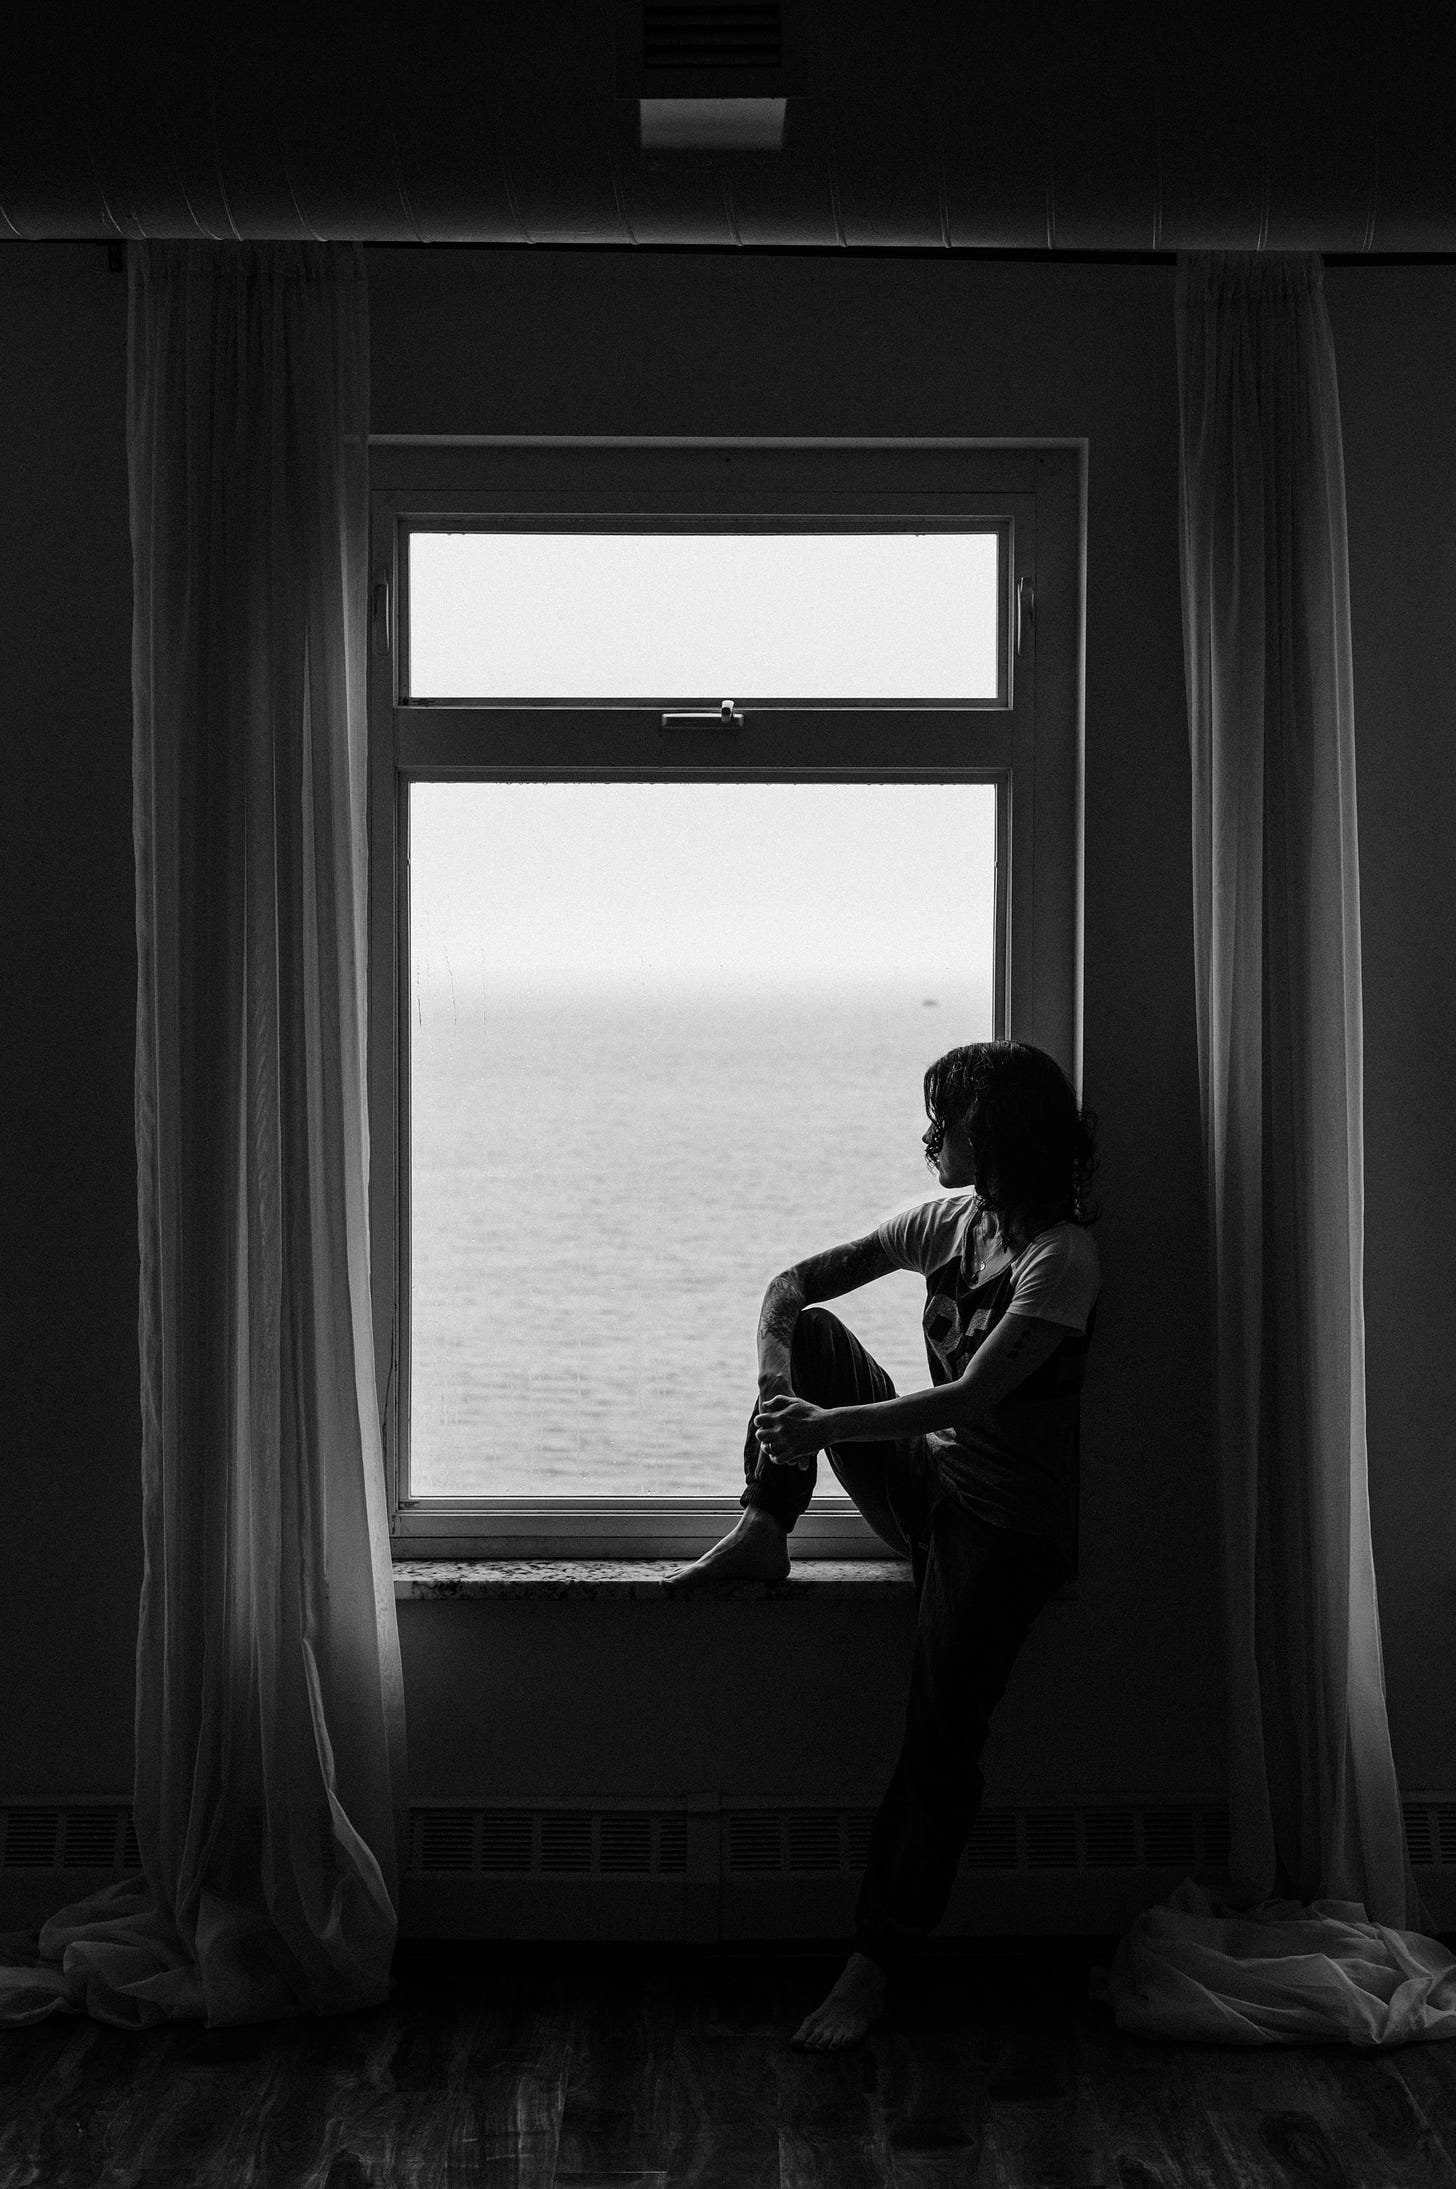 Author seated on large window sill looking out at the water